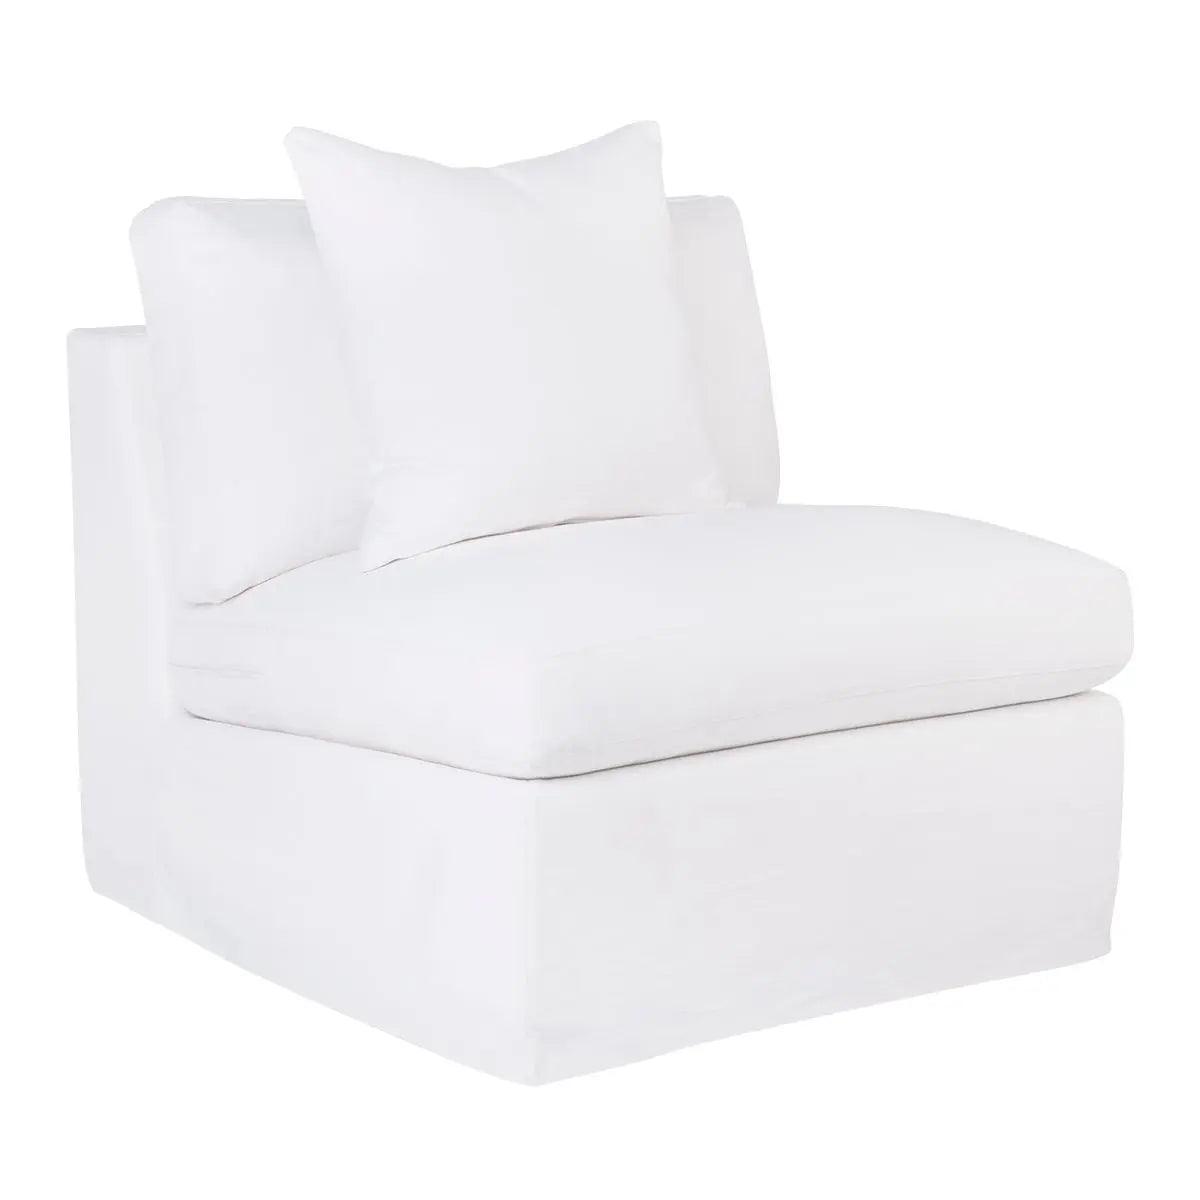 Cafe Lighting & Living Birkshire Slip Cover Occasional Chair - White Linen - Occasional Chair324569320294120910 7